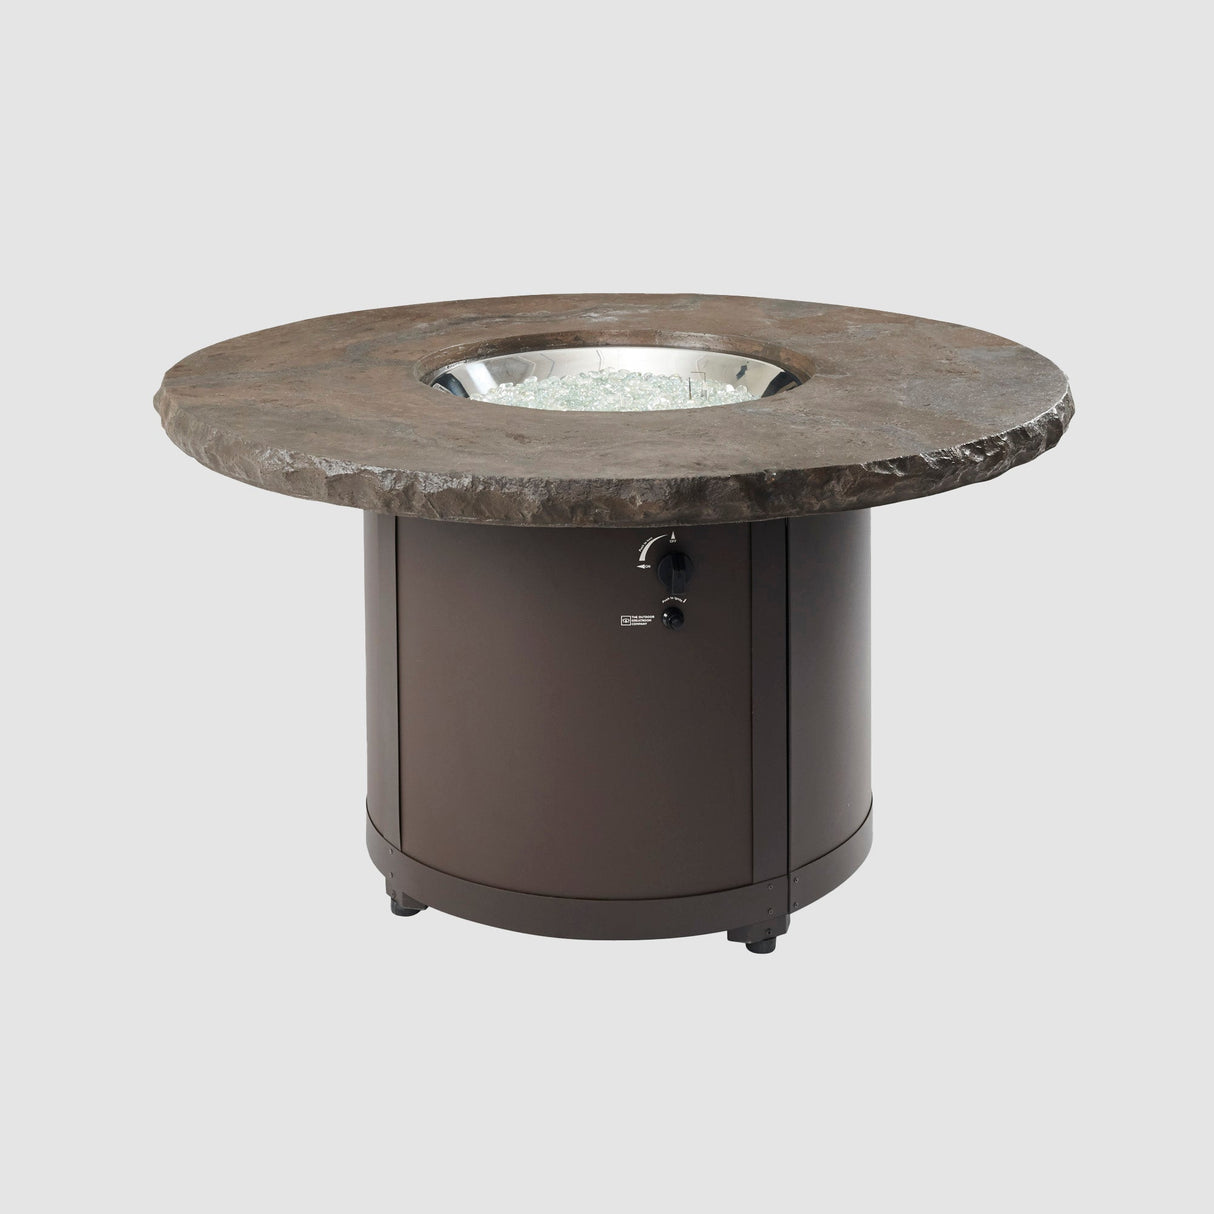 The Marbleized Noche Beacon Round Gas Fire Pit Table with its burner exposed on a grey background